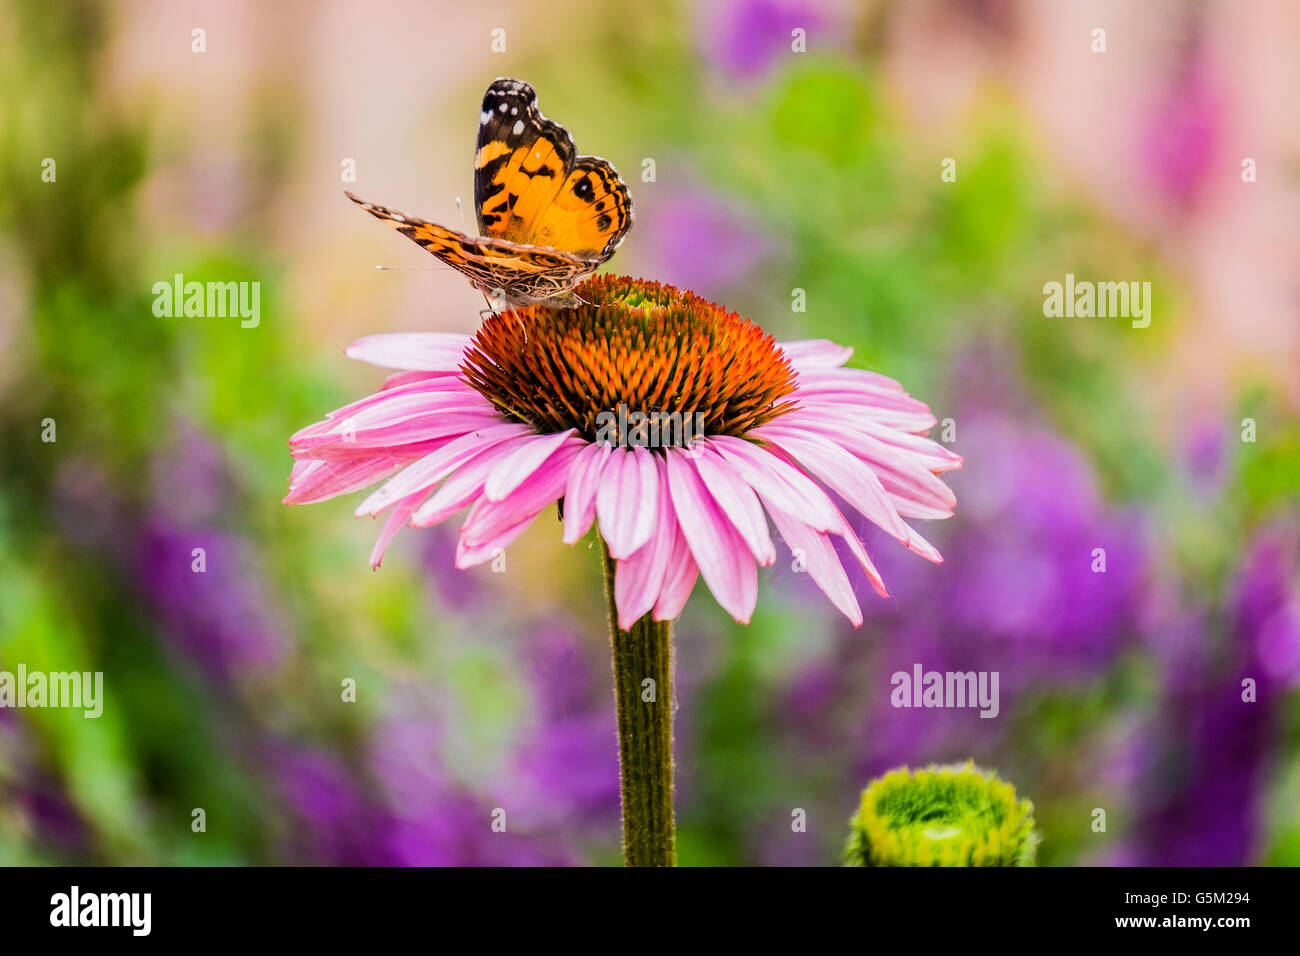 A Painted Lady butterfly, Vanessa cardui on Echinacea bloom, a coneflower. Oklahoma, USA. Stock Photo